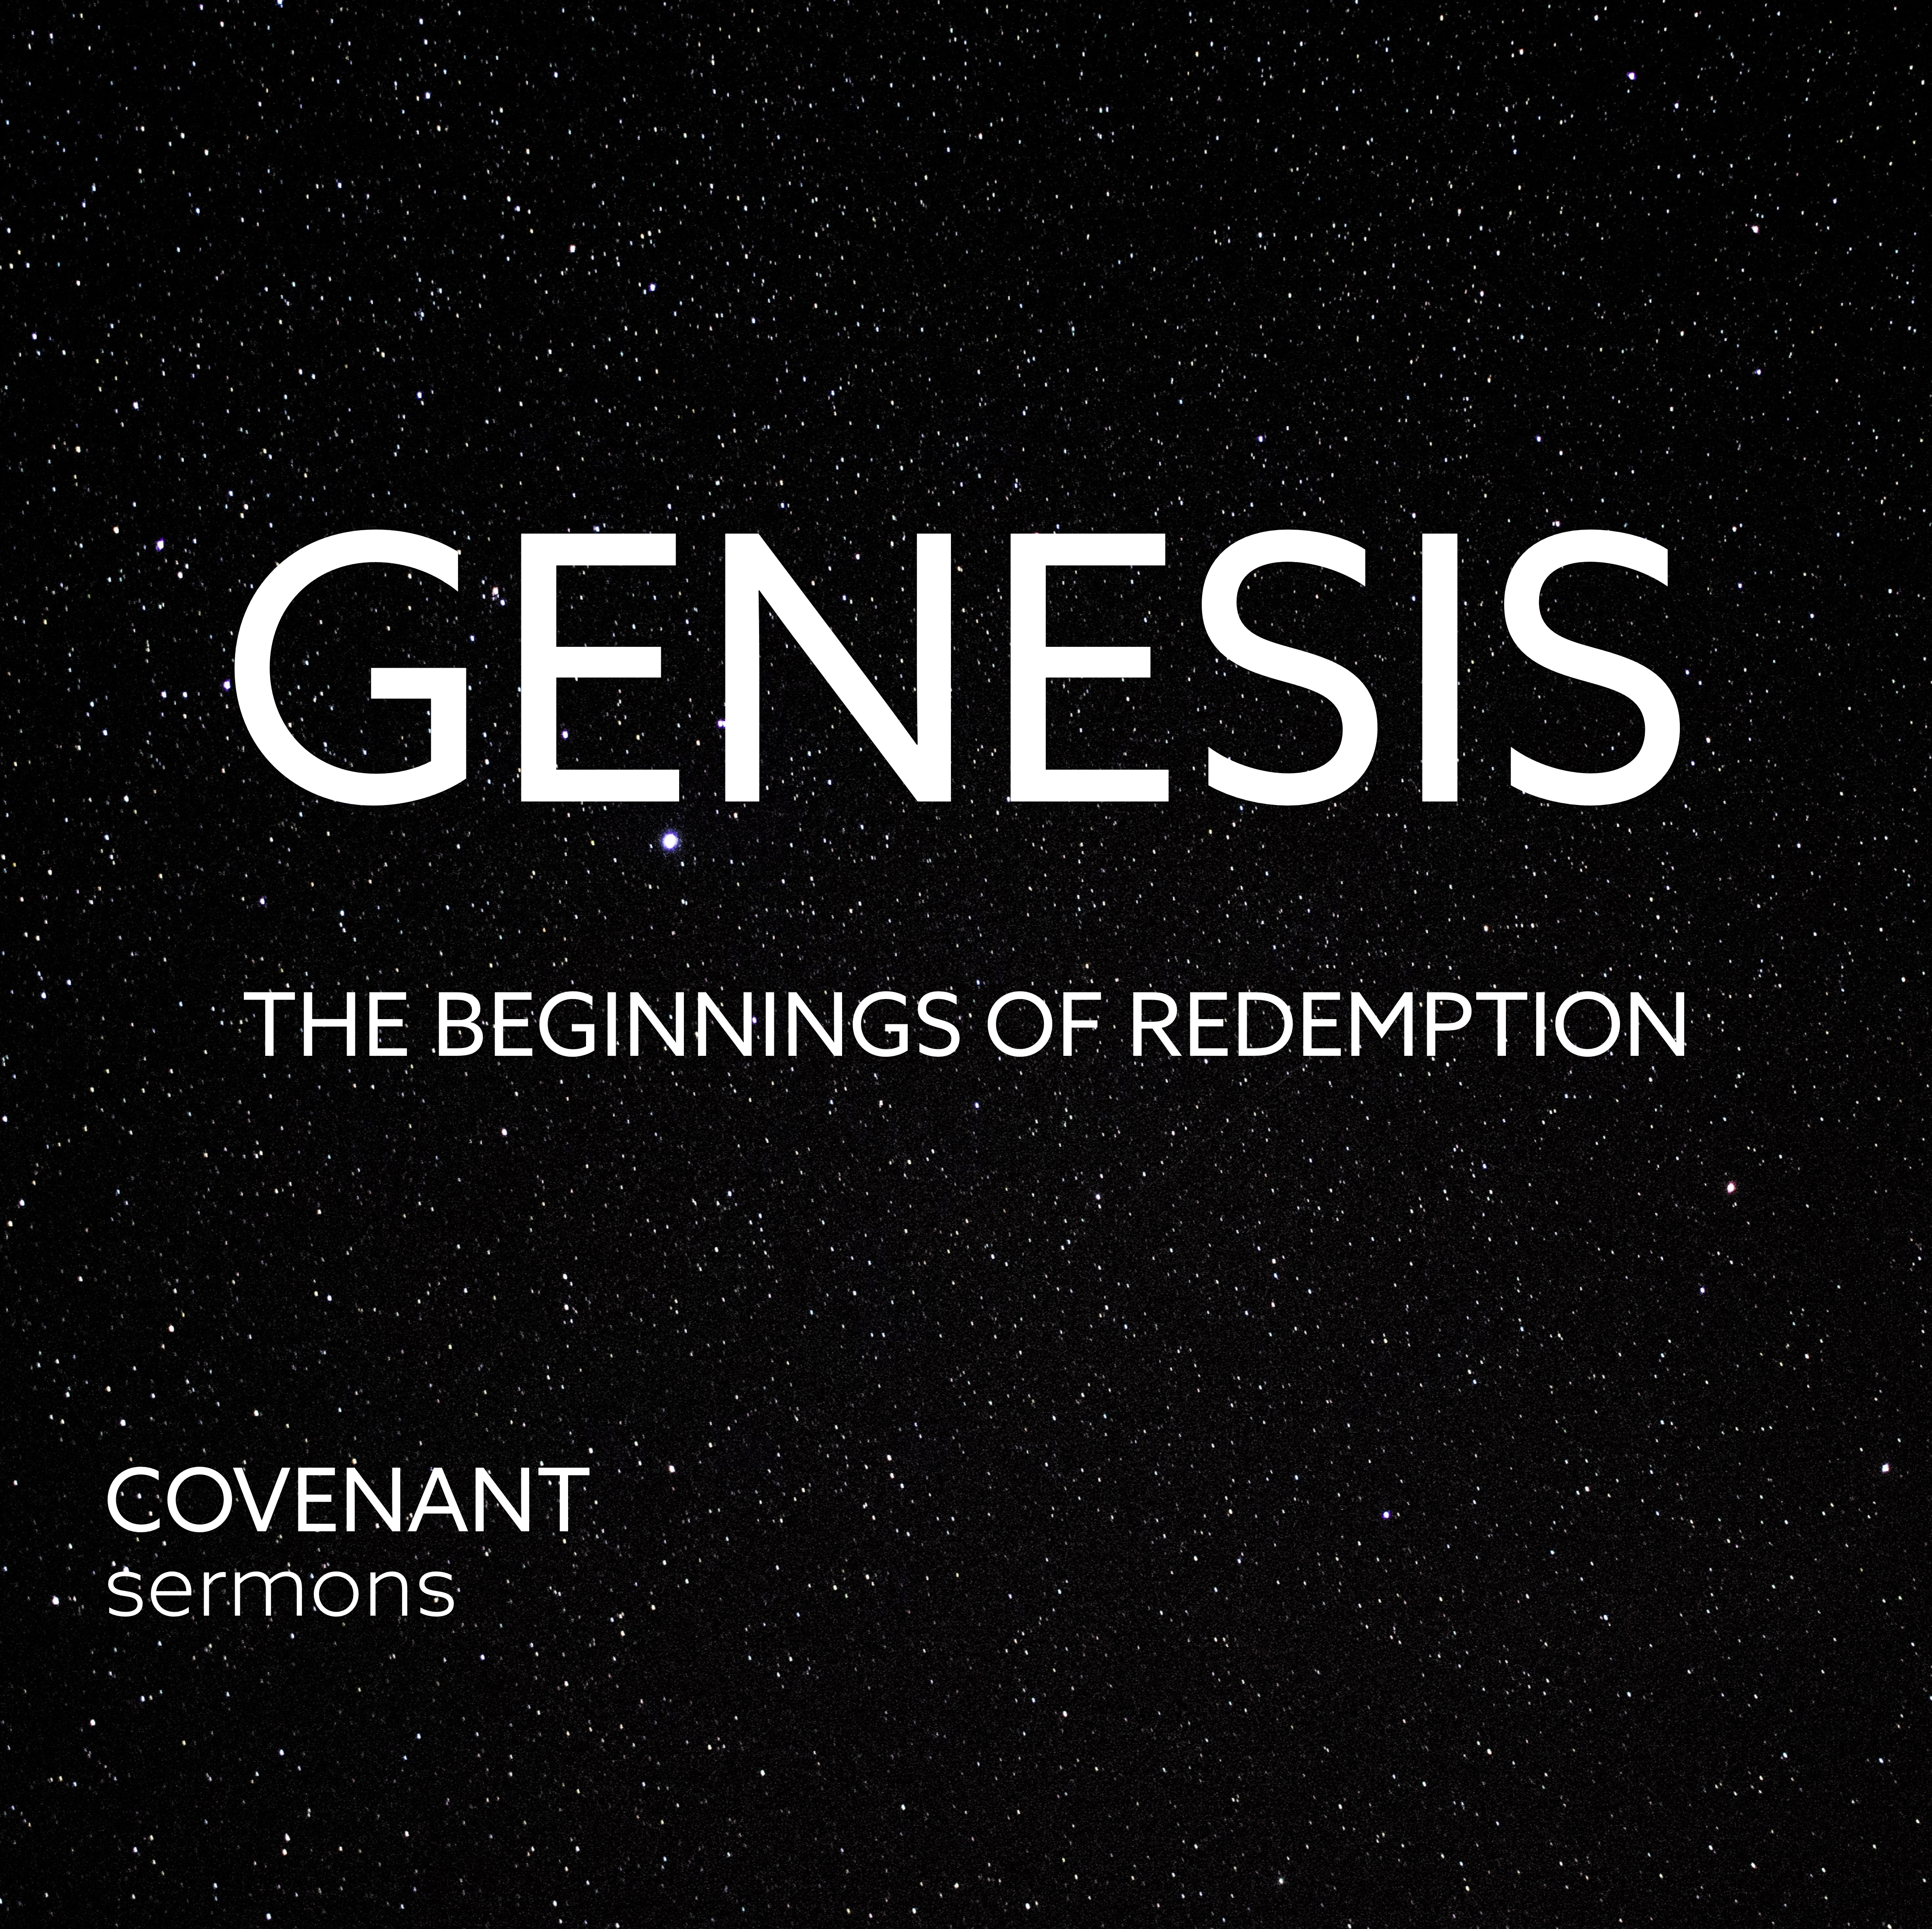 The Gospel Was Preached to Abraham | Genesis 12:1-9